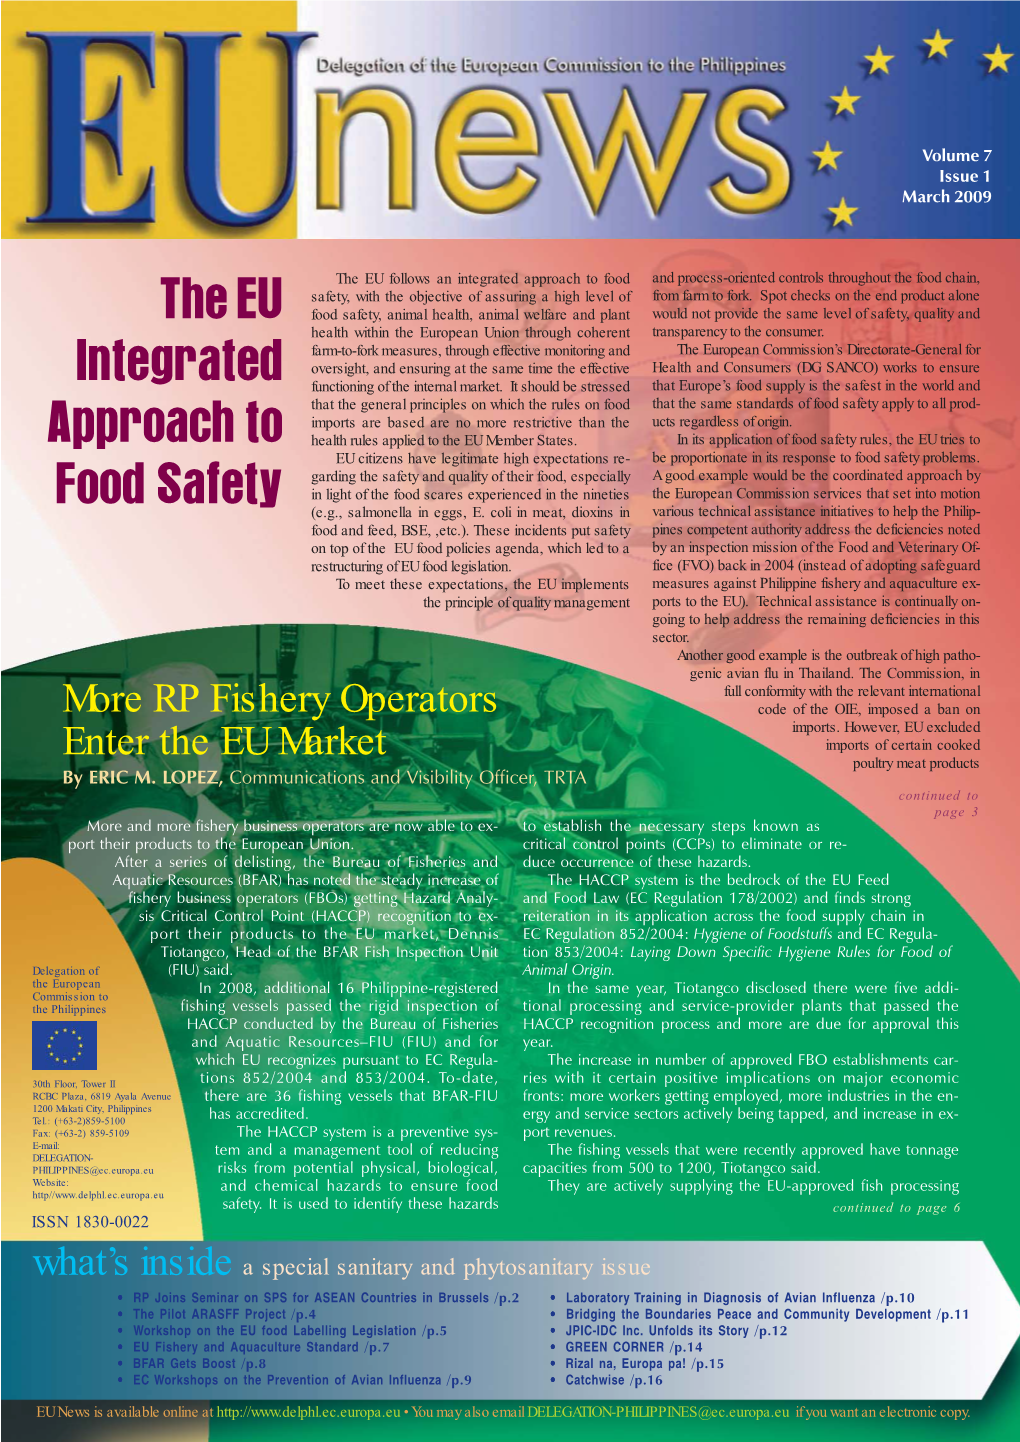 The EU Integrated Approach to Food Safety